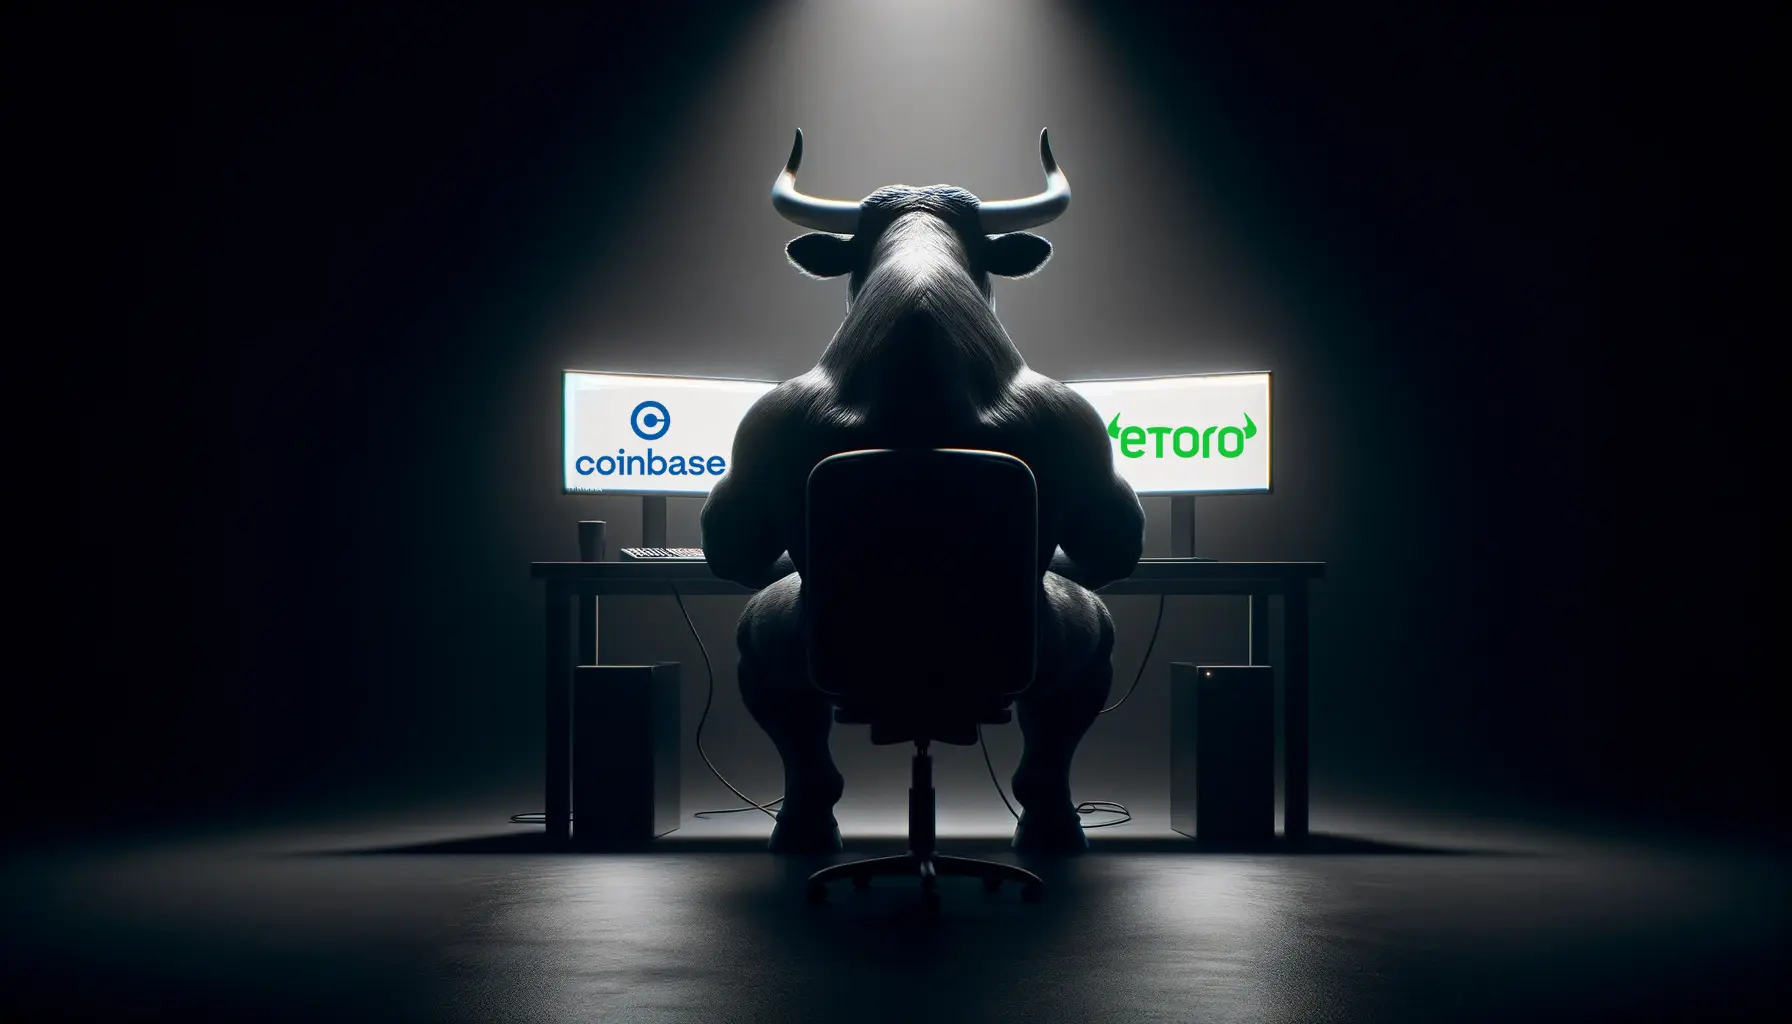 Silhouette of a bull sitting at a desk, symbolizing bullish market trends, between illuminated logos of Coinbase and eToro on computer screens in a dark room.